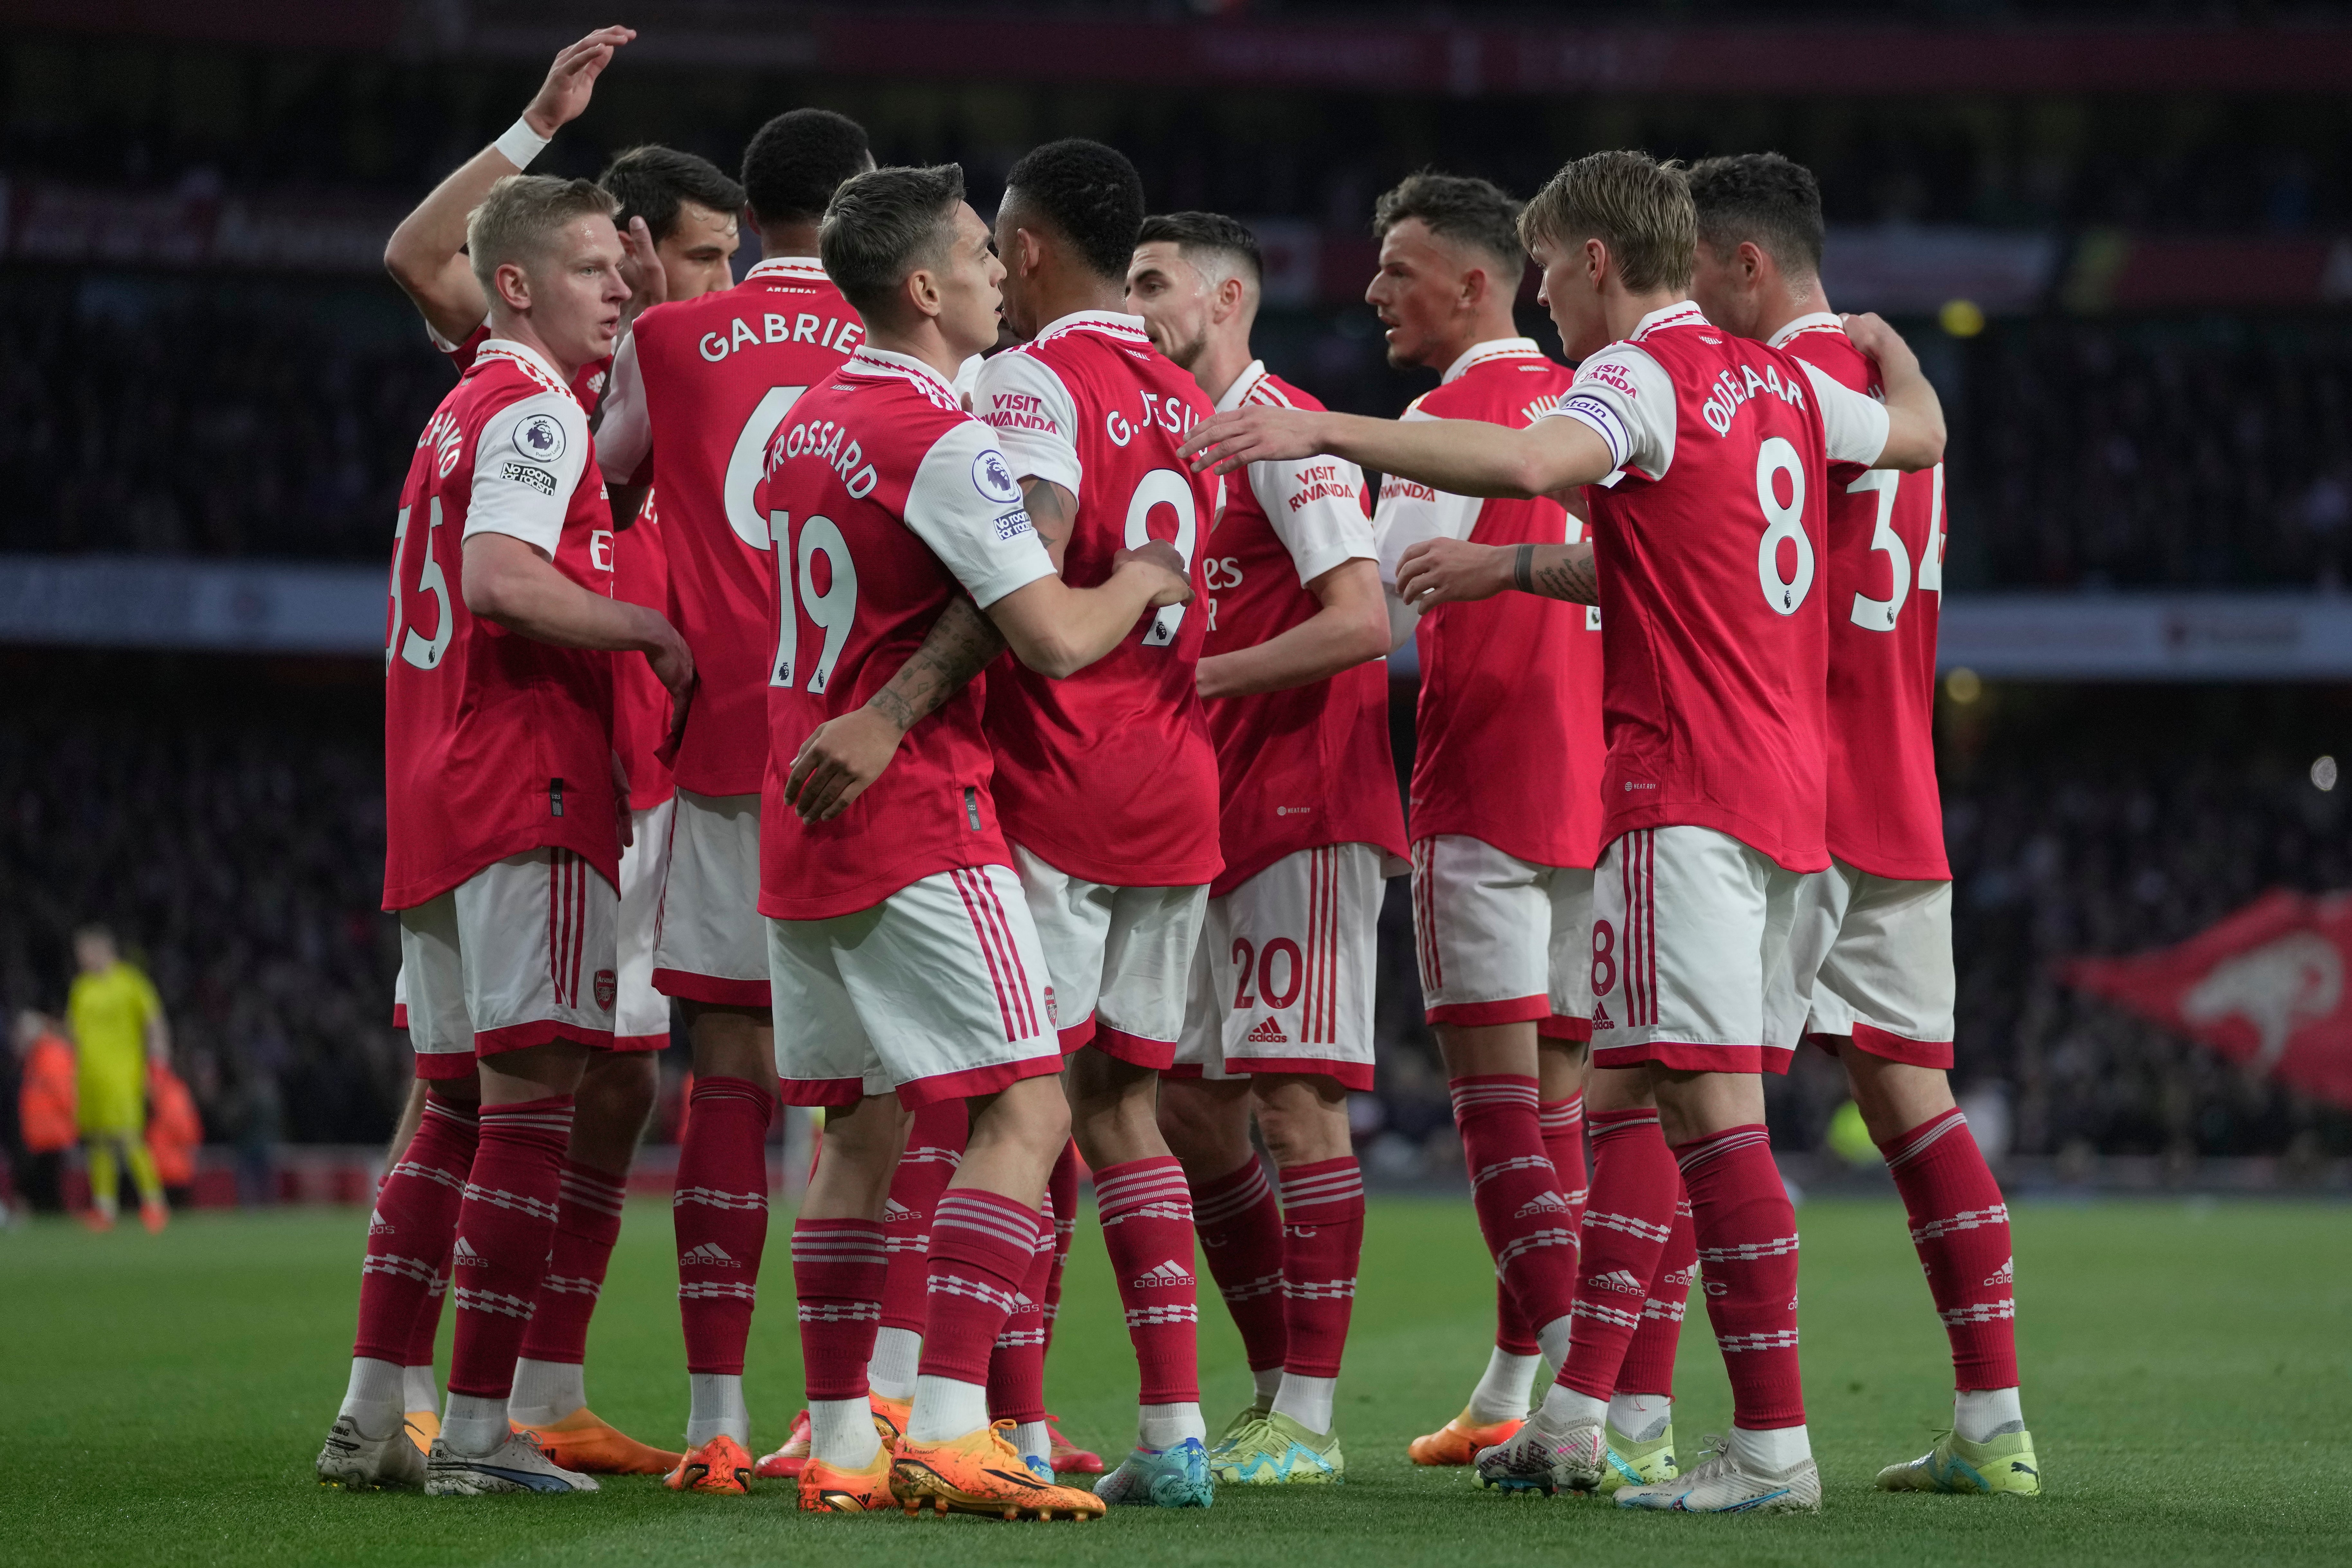 Arsenal take on Nottingham Forest with the Premier League season nearly at an end